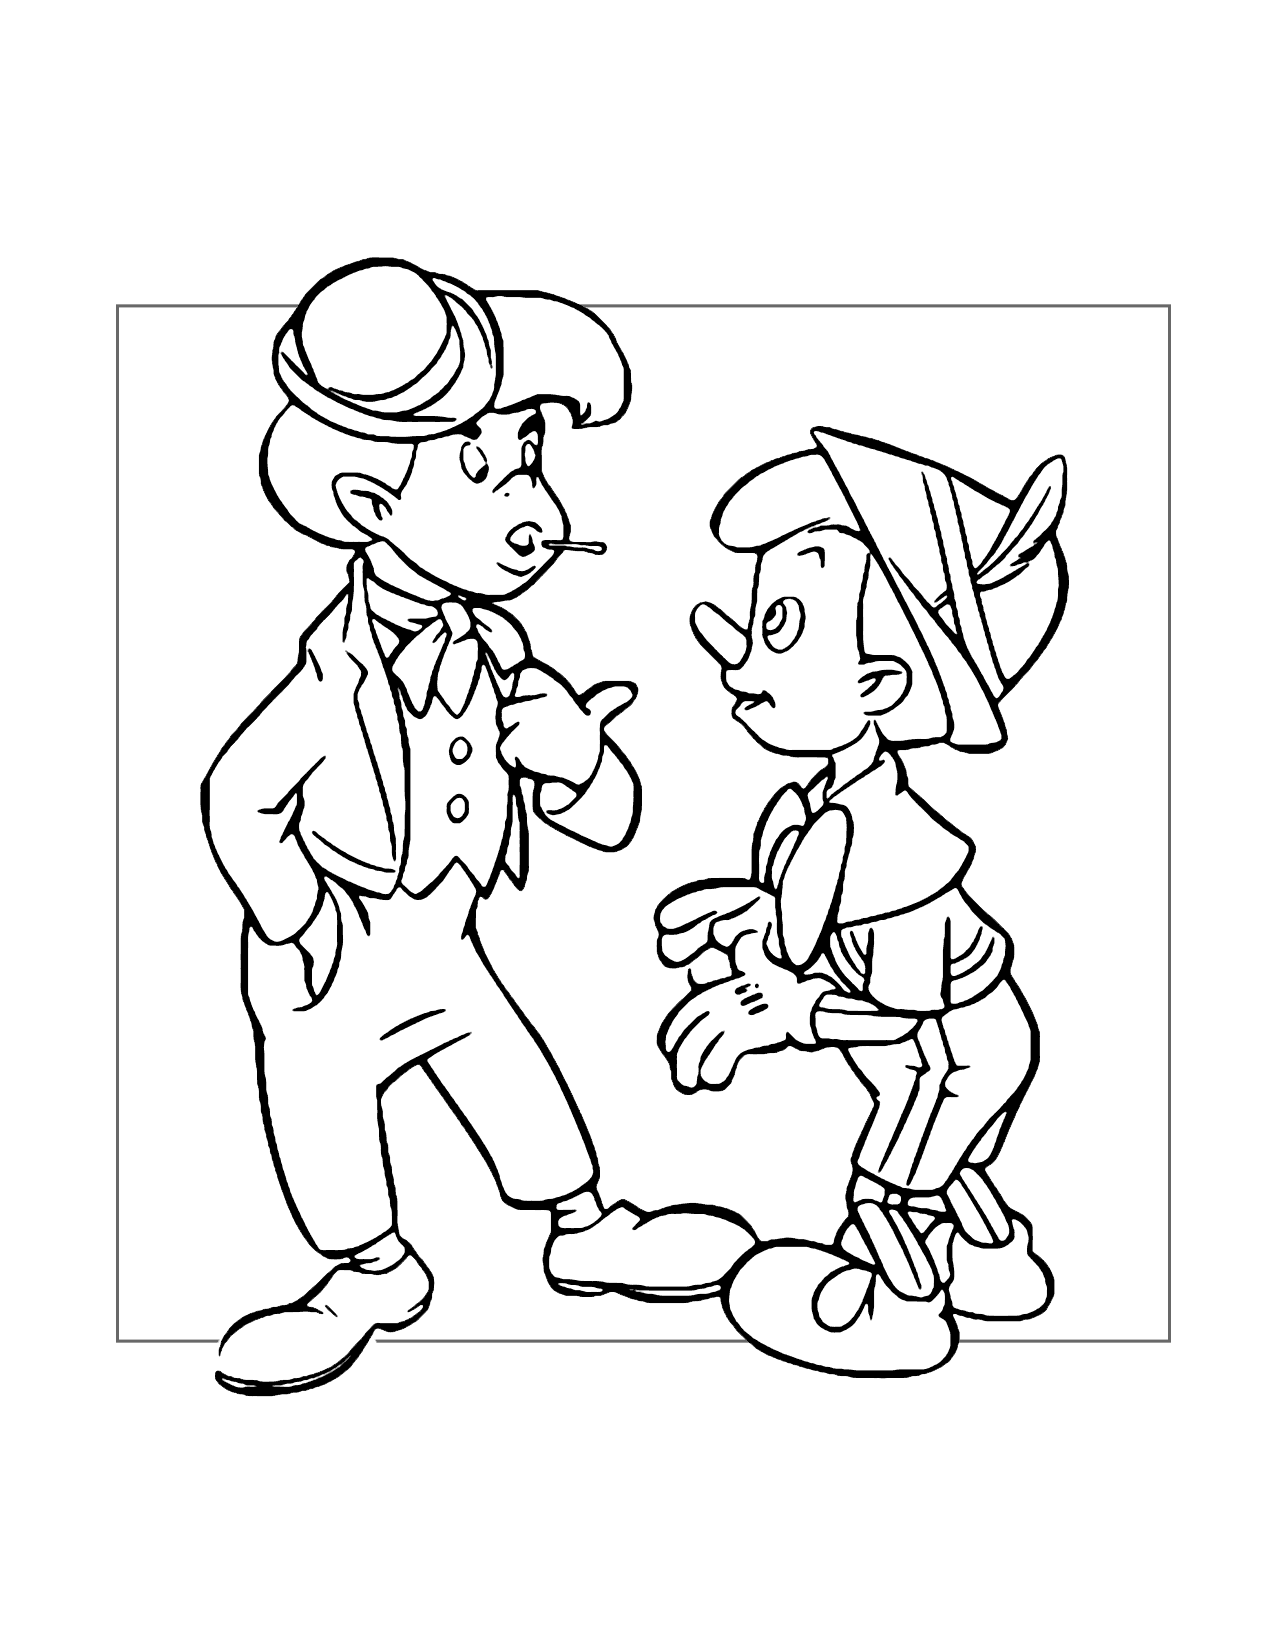 Pinocchio Meets Lampwick Coloring Page